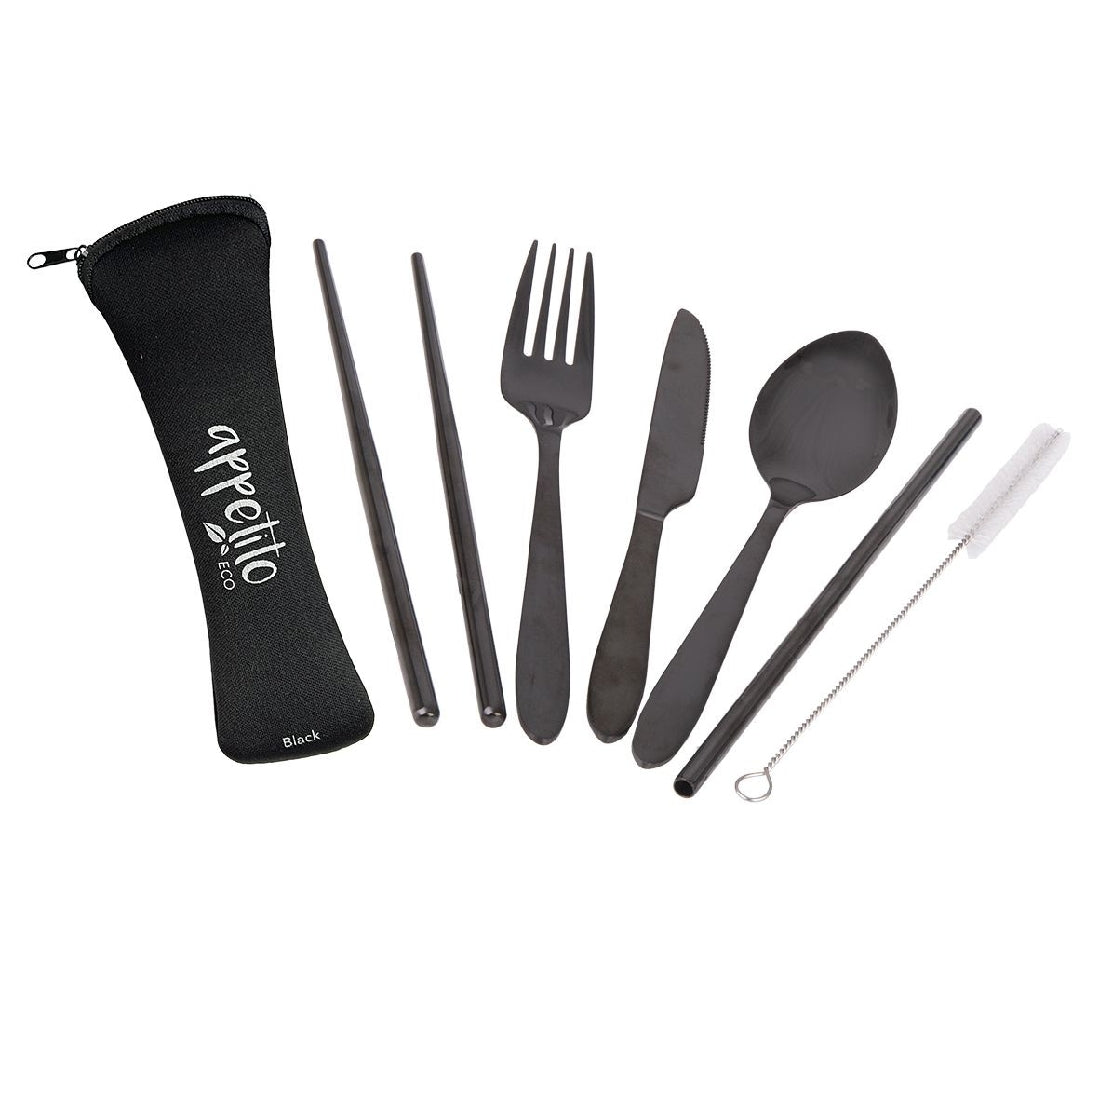 Appetito 6 Piece Stainless Steel Traveller's Cutlery Set - Black